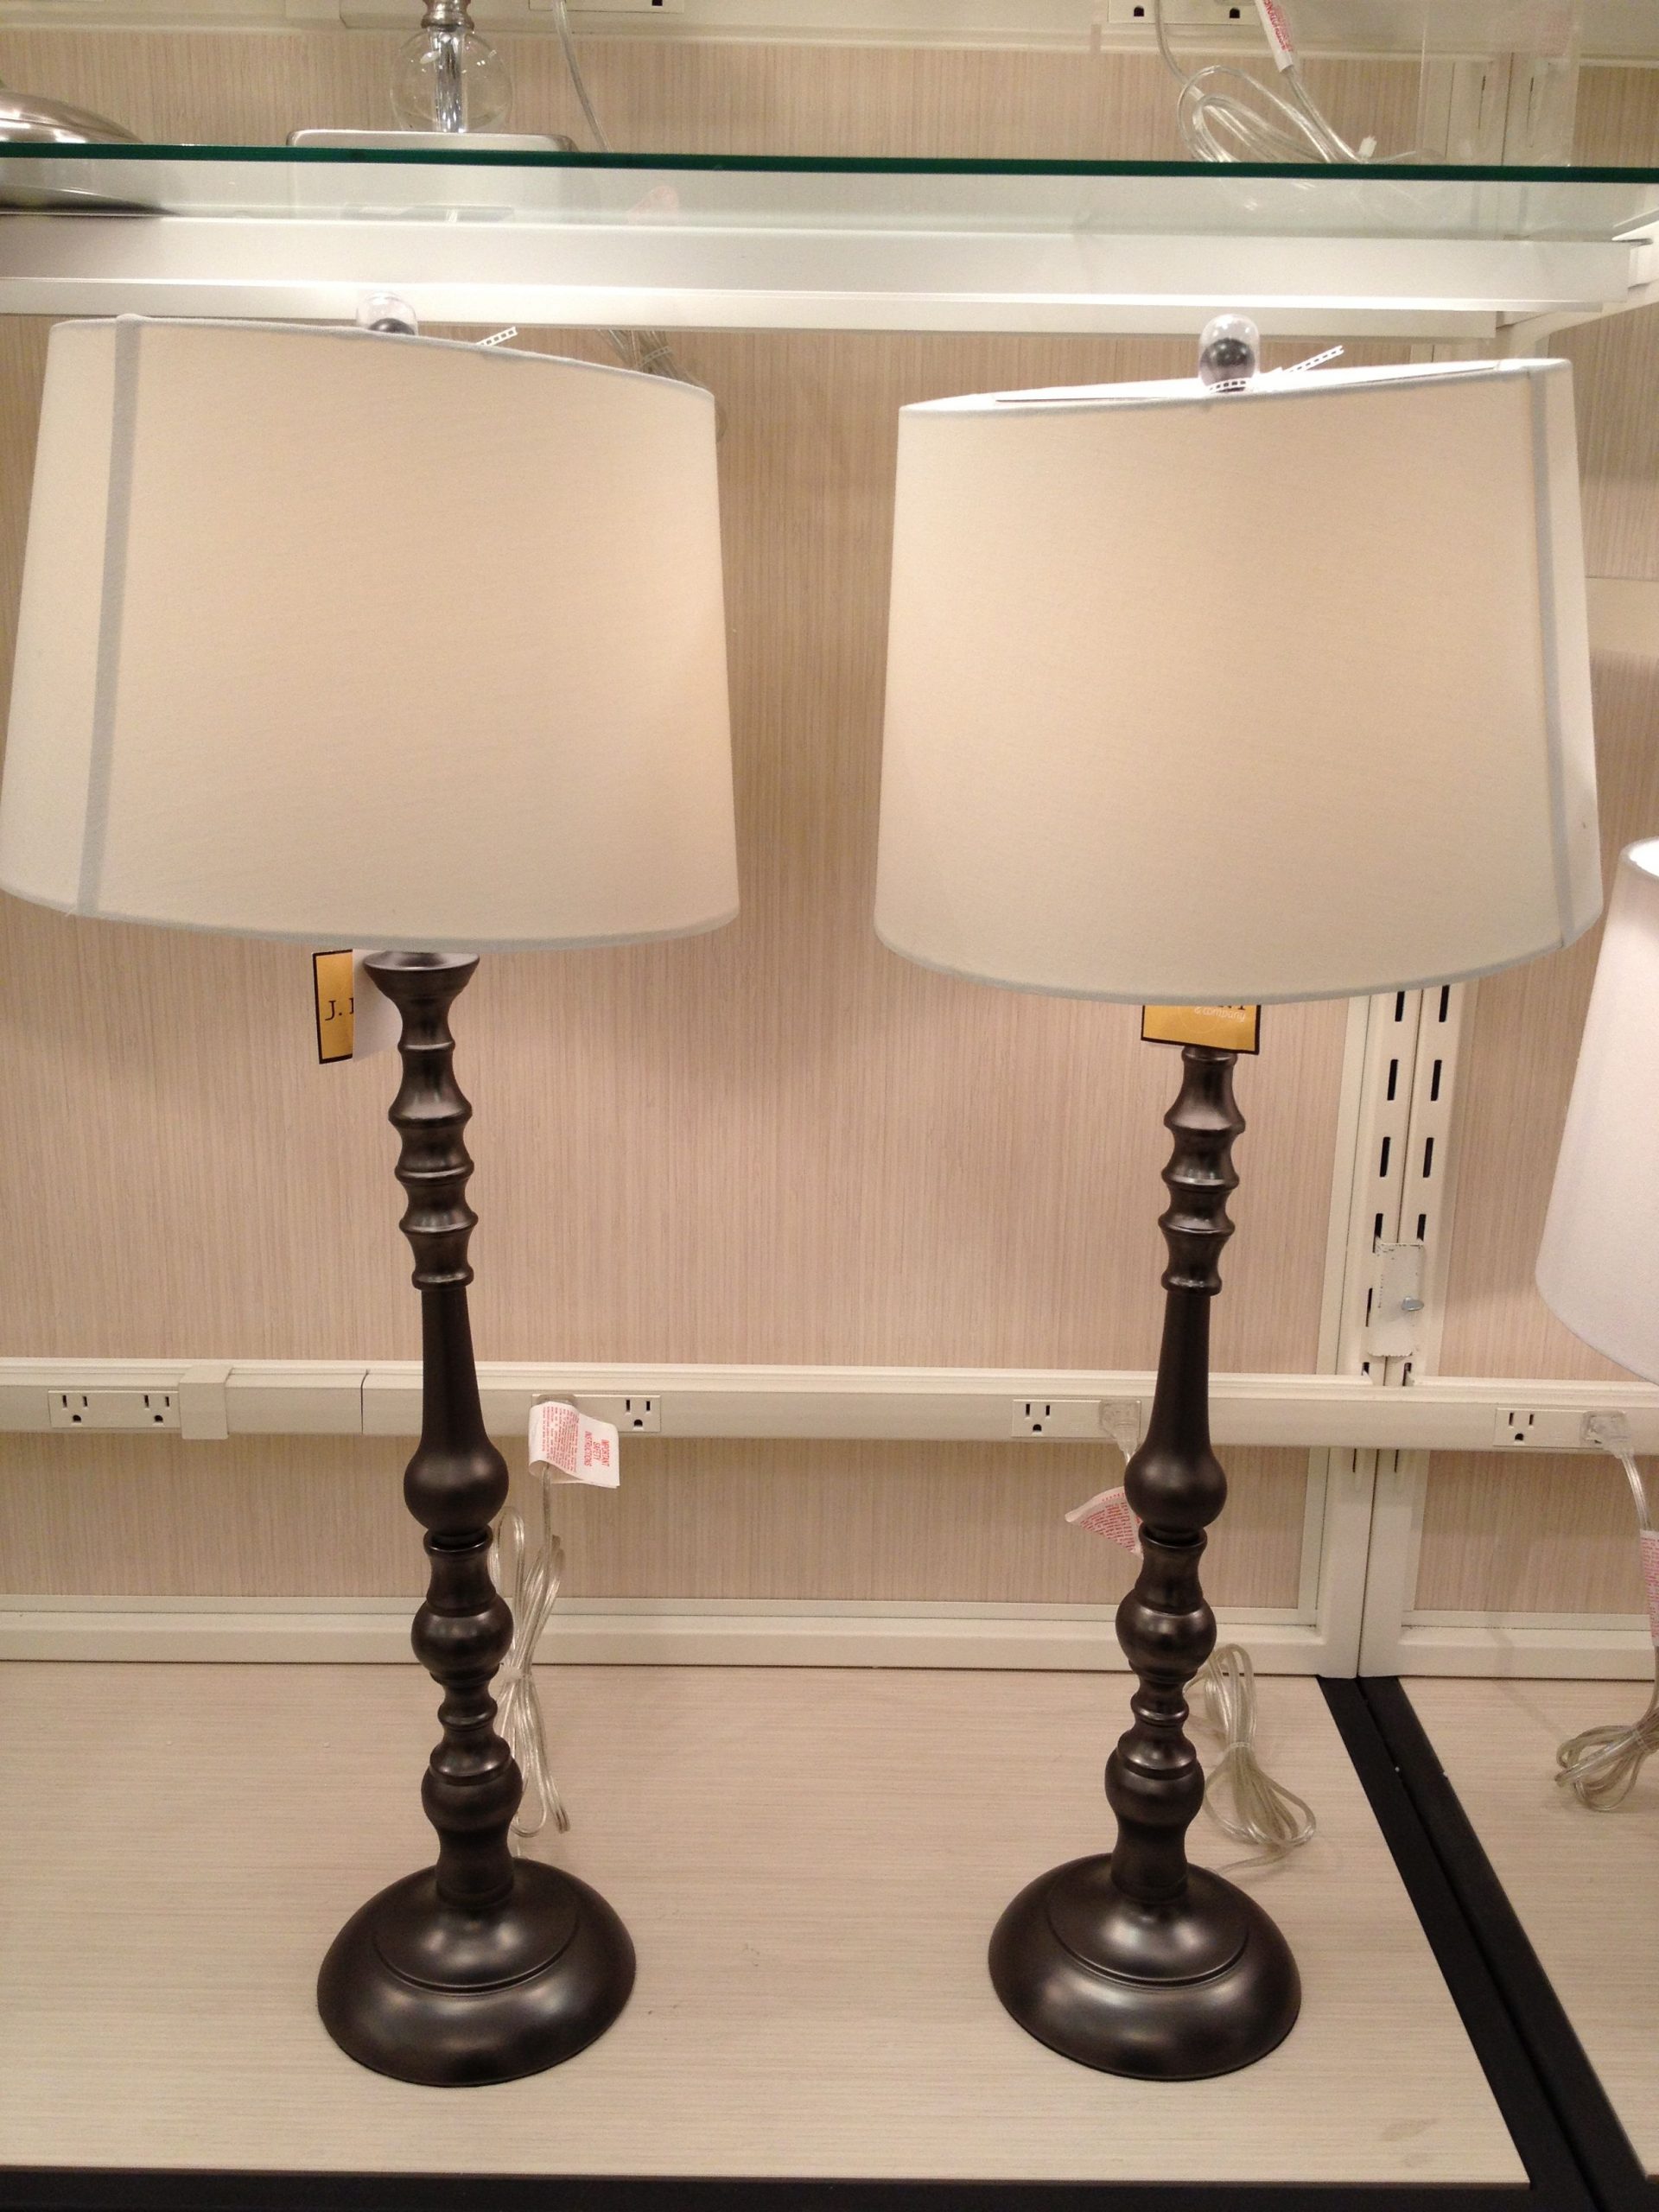 Bedside Table Lamp Size • Display